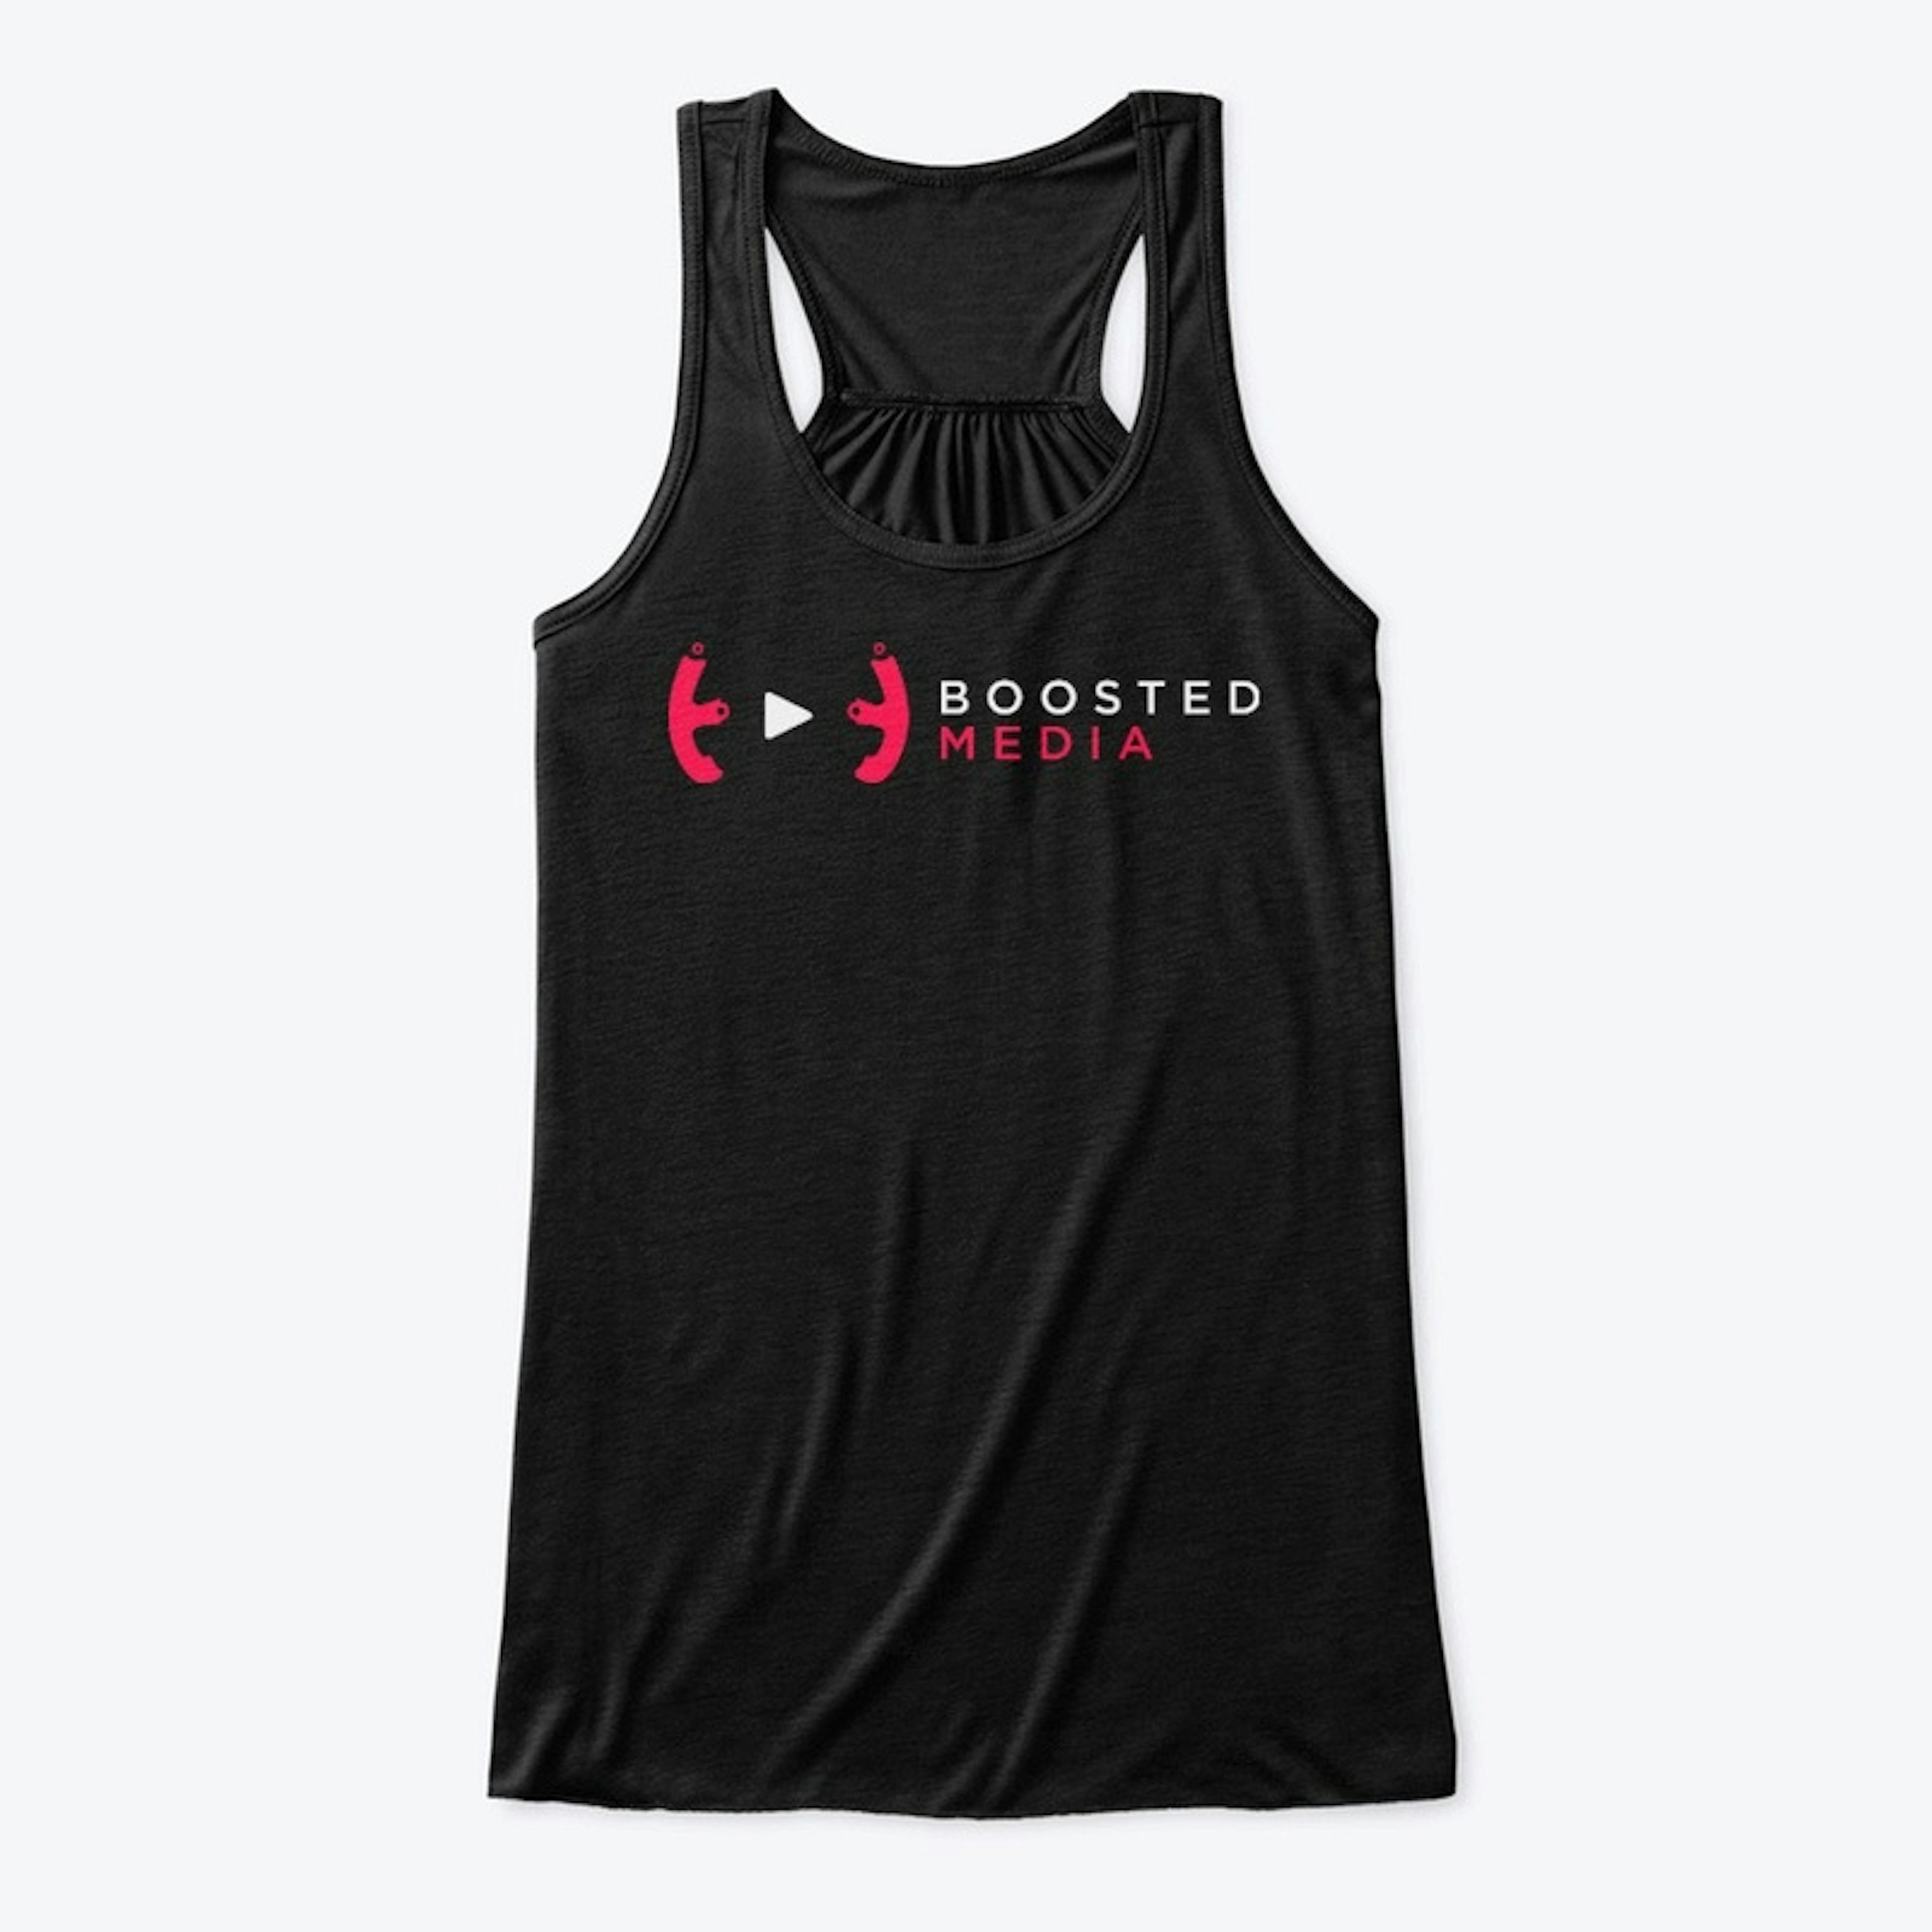 BOOSTED MEDIA Women's Tank Top